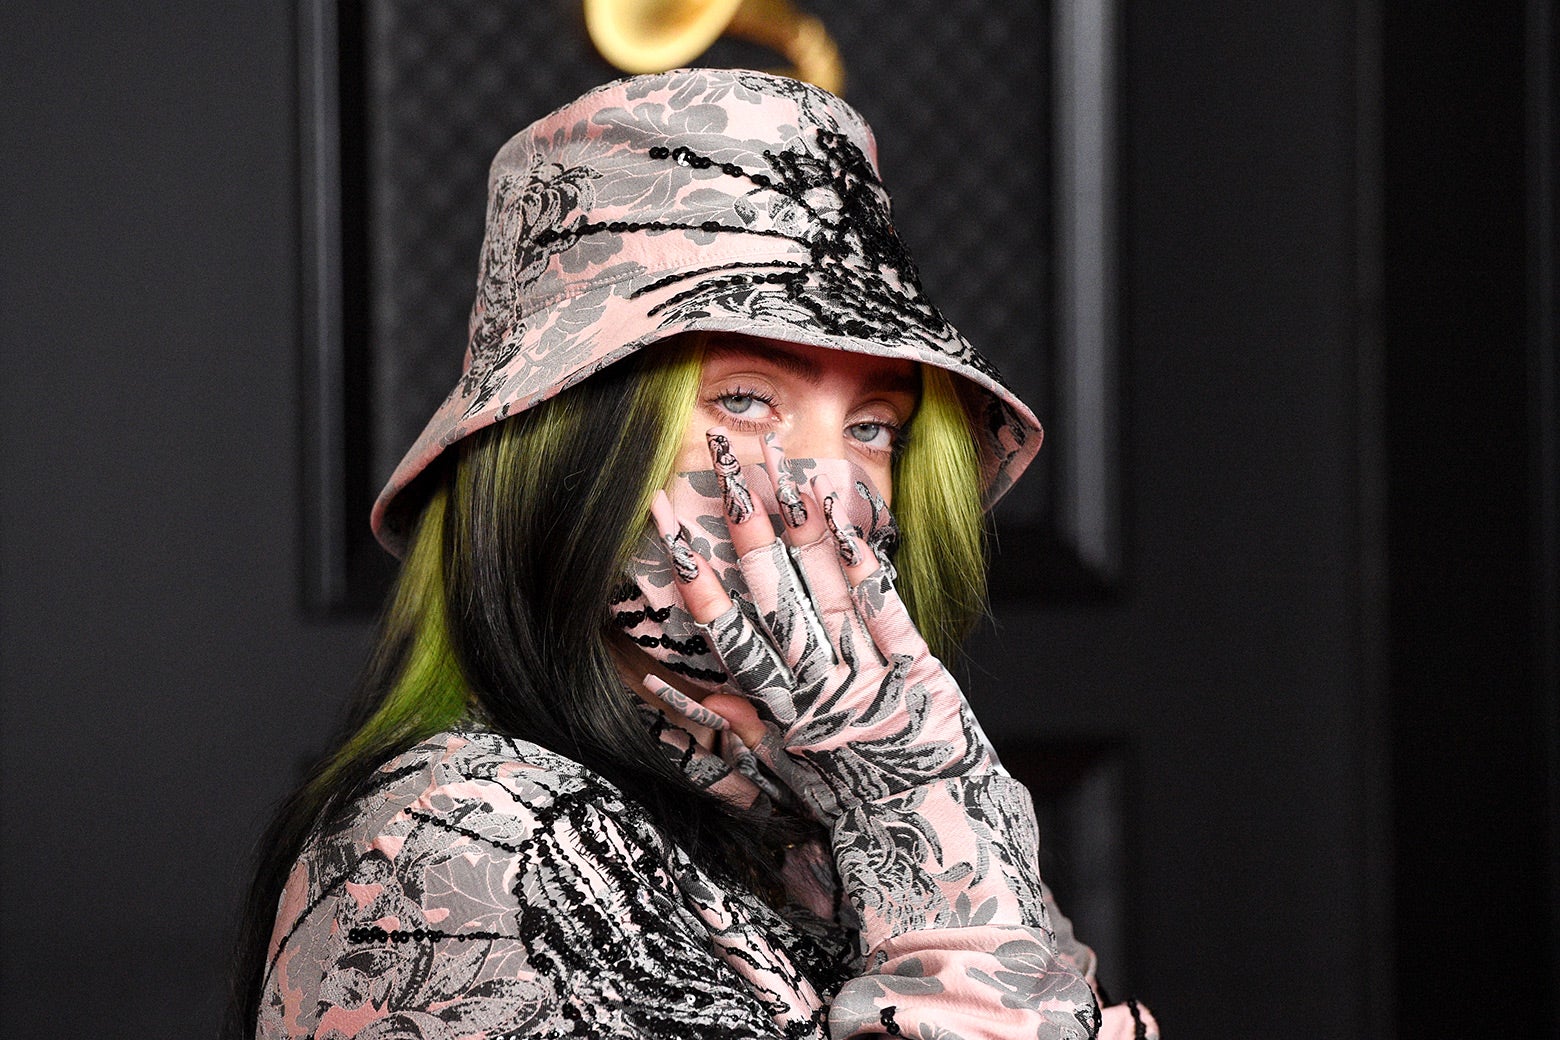 A girl with black-and-green hair wears a bucket hat with a pink, gray, and black floral-style pattern and a matching long-sleeve shirt. Her hand is covering her face as she eyes the camera. 